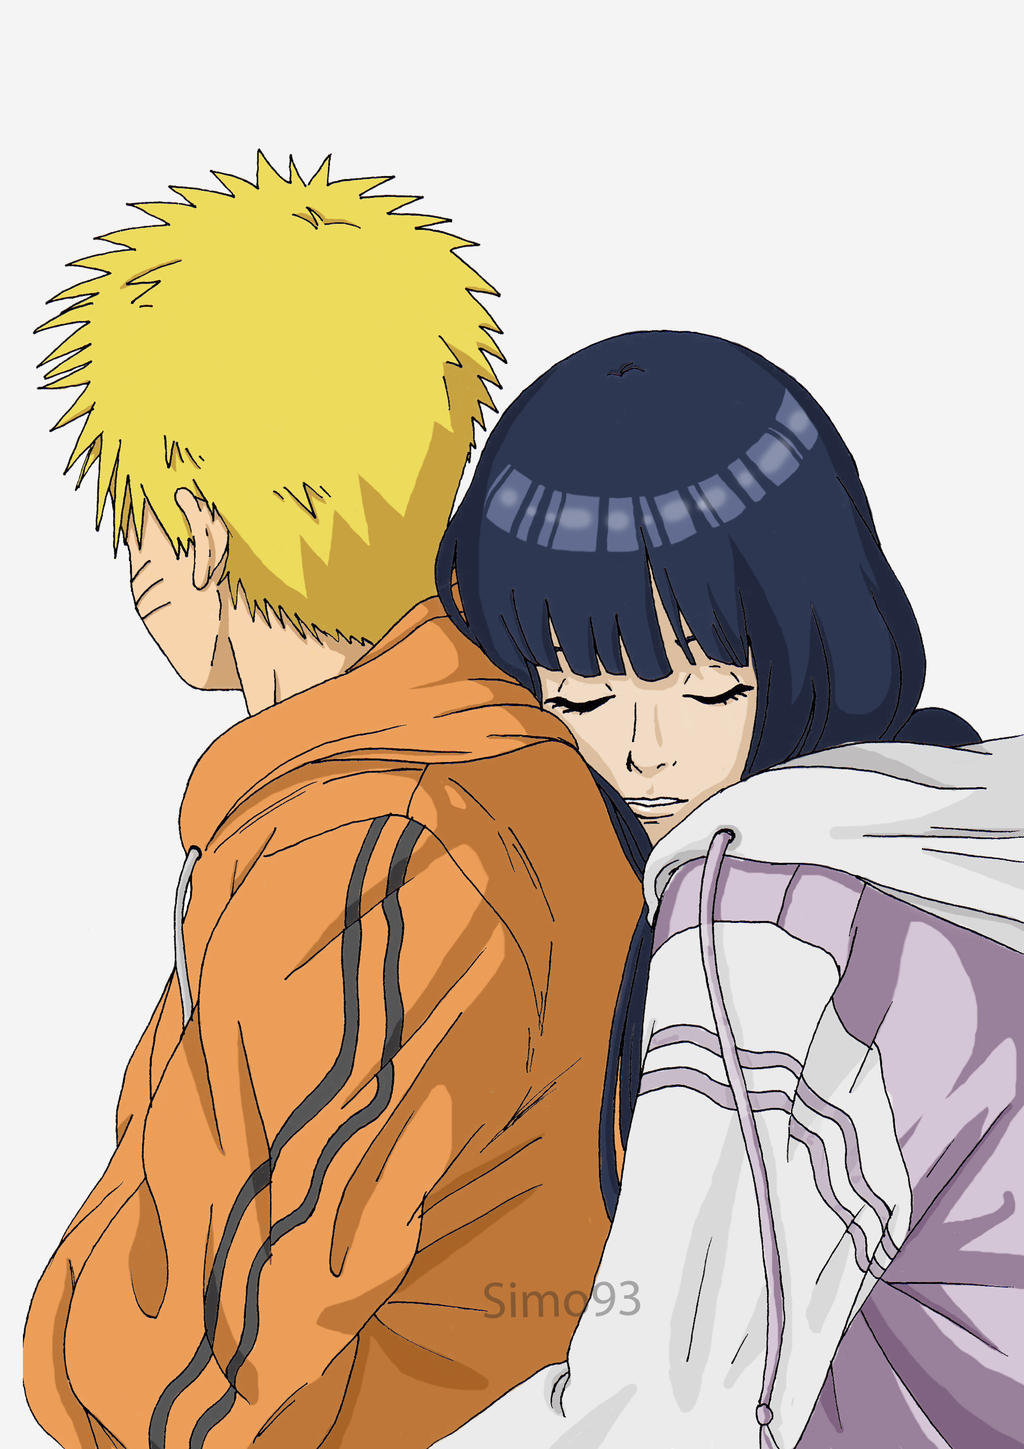 Why Did Hinata Like Naruto Early in the Series?